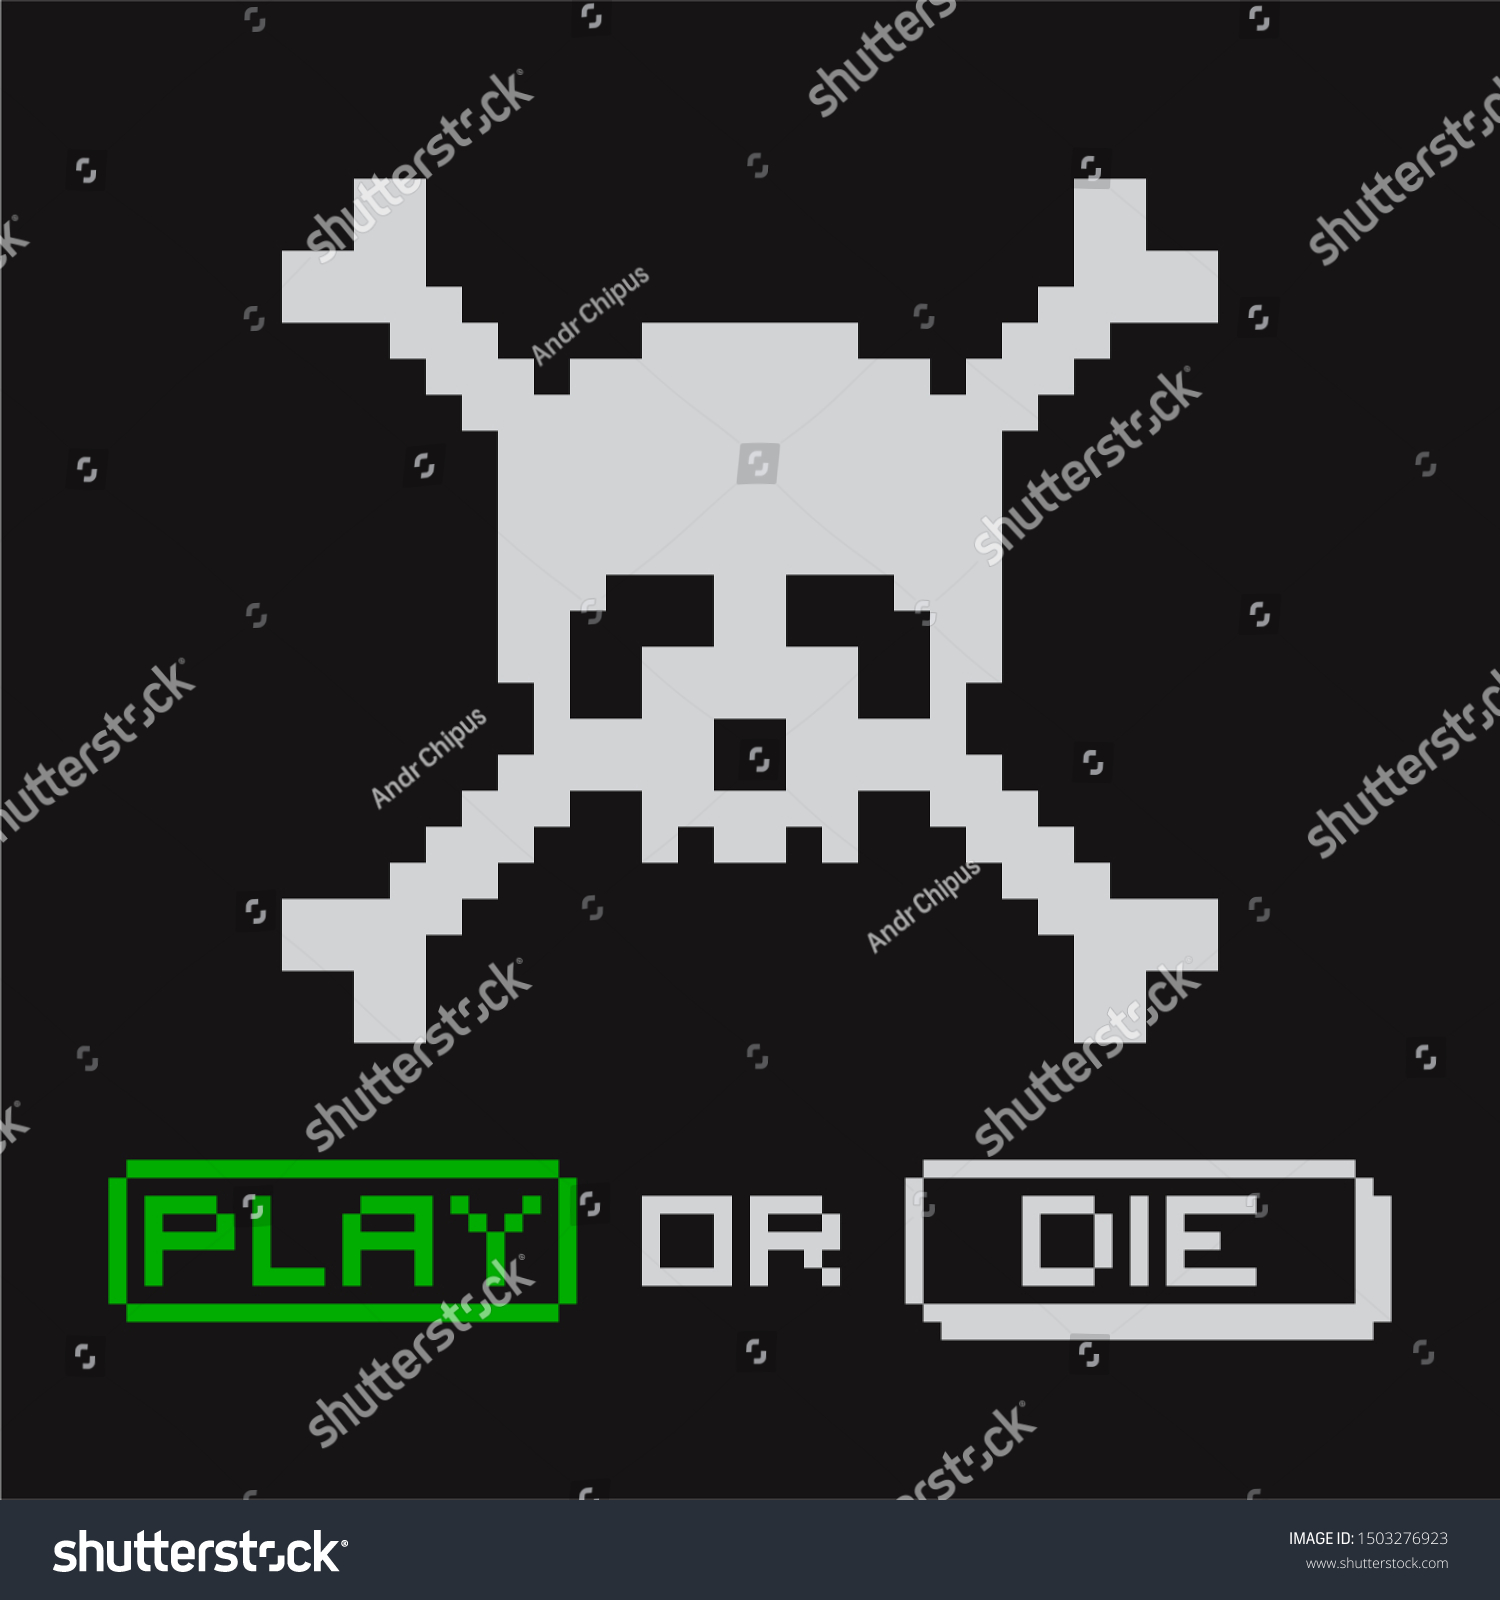 skull and crossbones video game